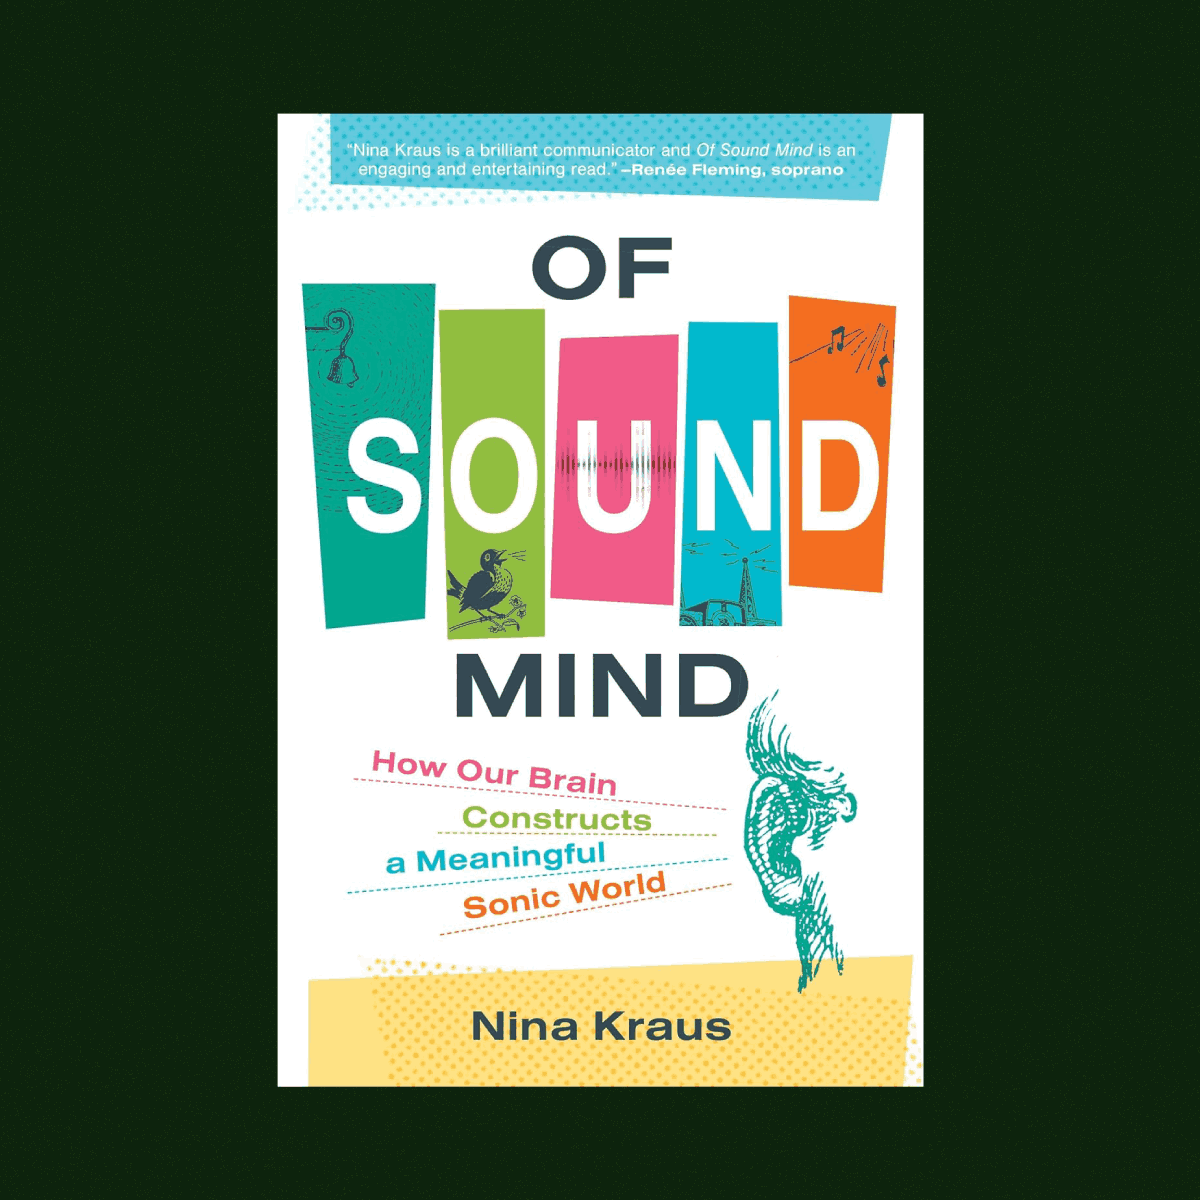 Of Sound Mind : How Our Brain Constructs a Meaningful Sonic World